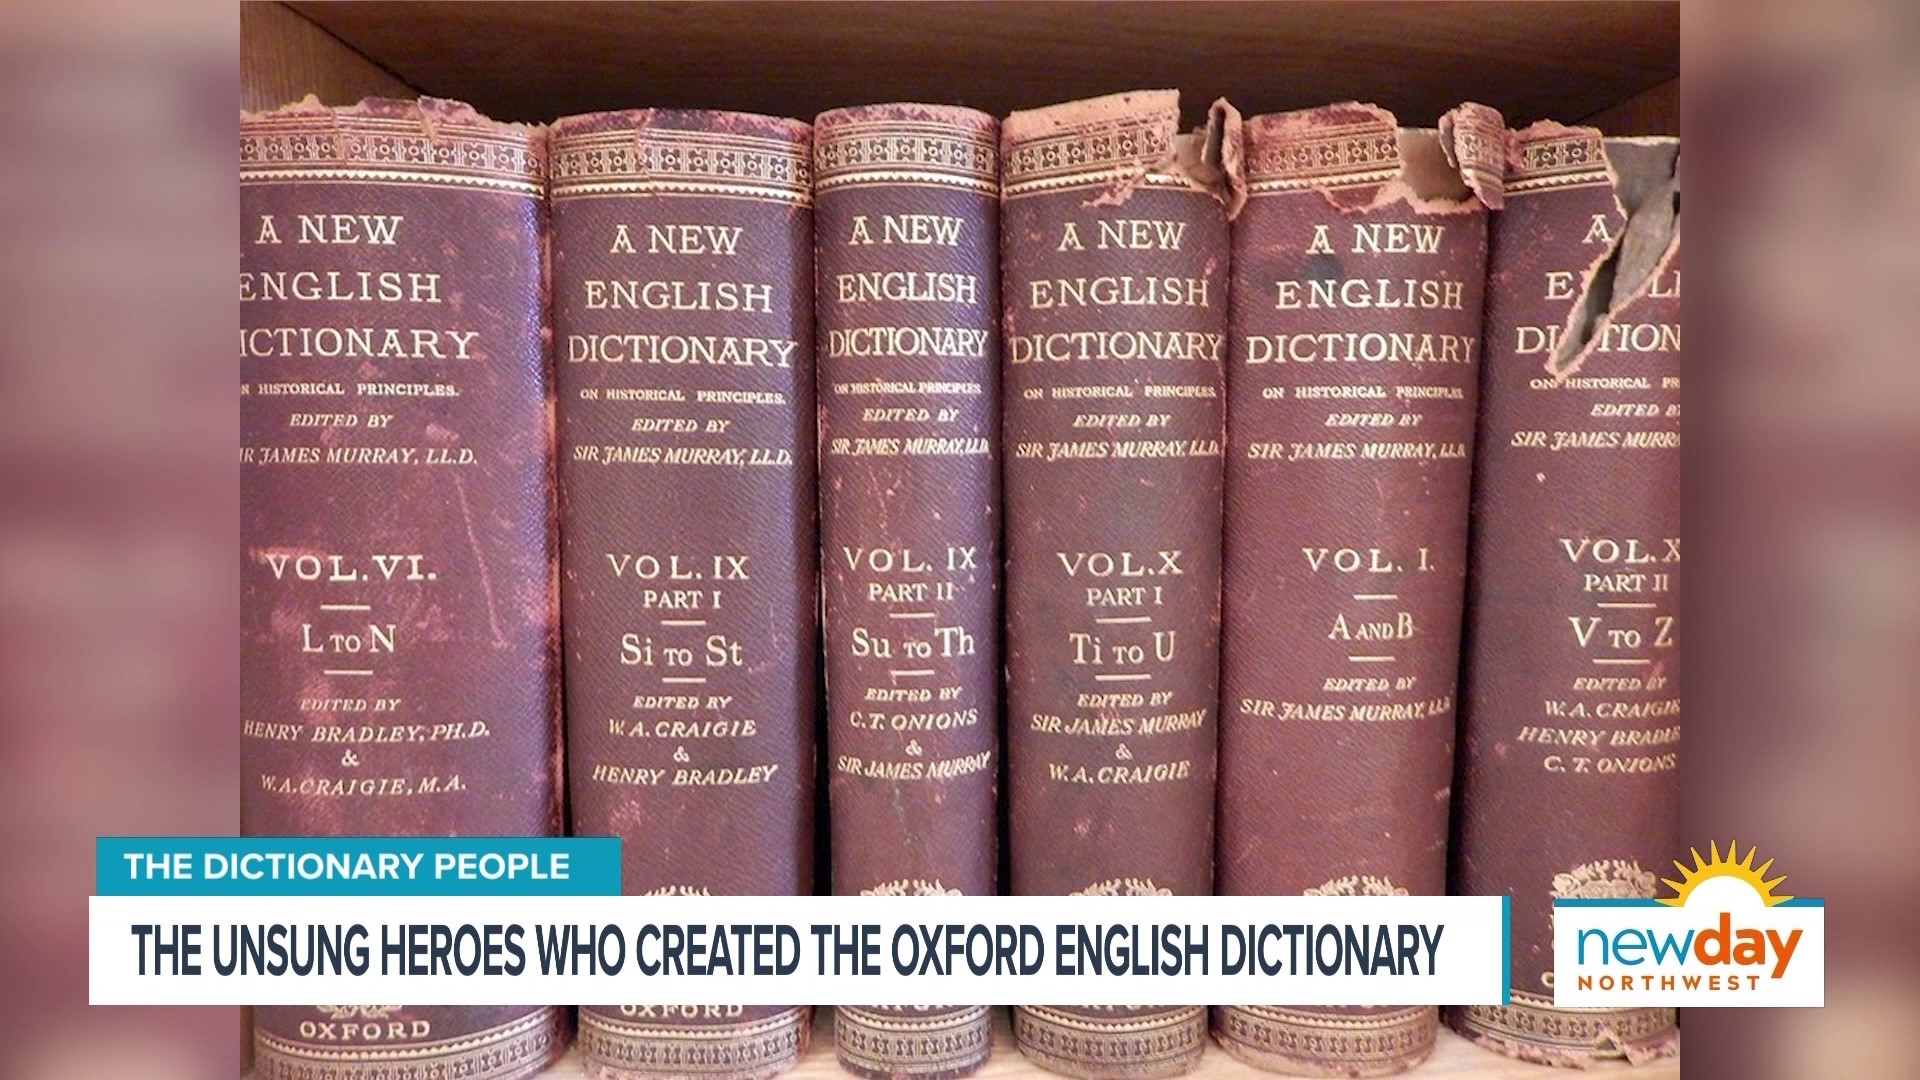 "The Dictionary People" reveals the suffragettes, murderers and every day people who helped define the English language.